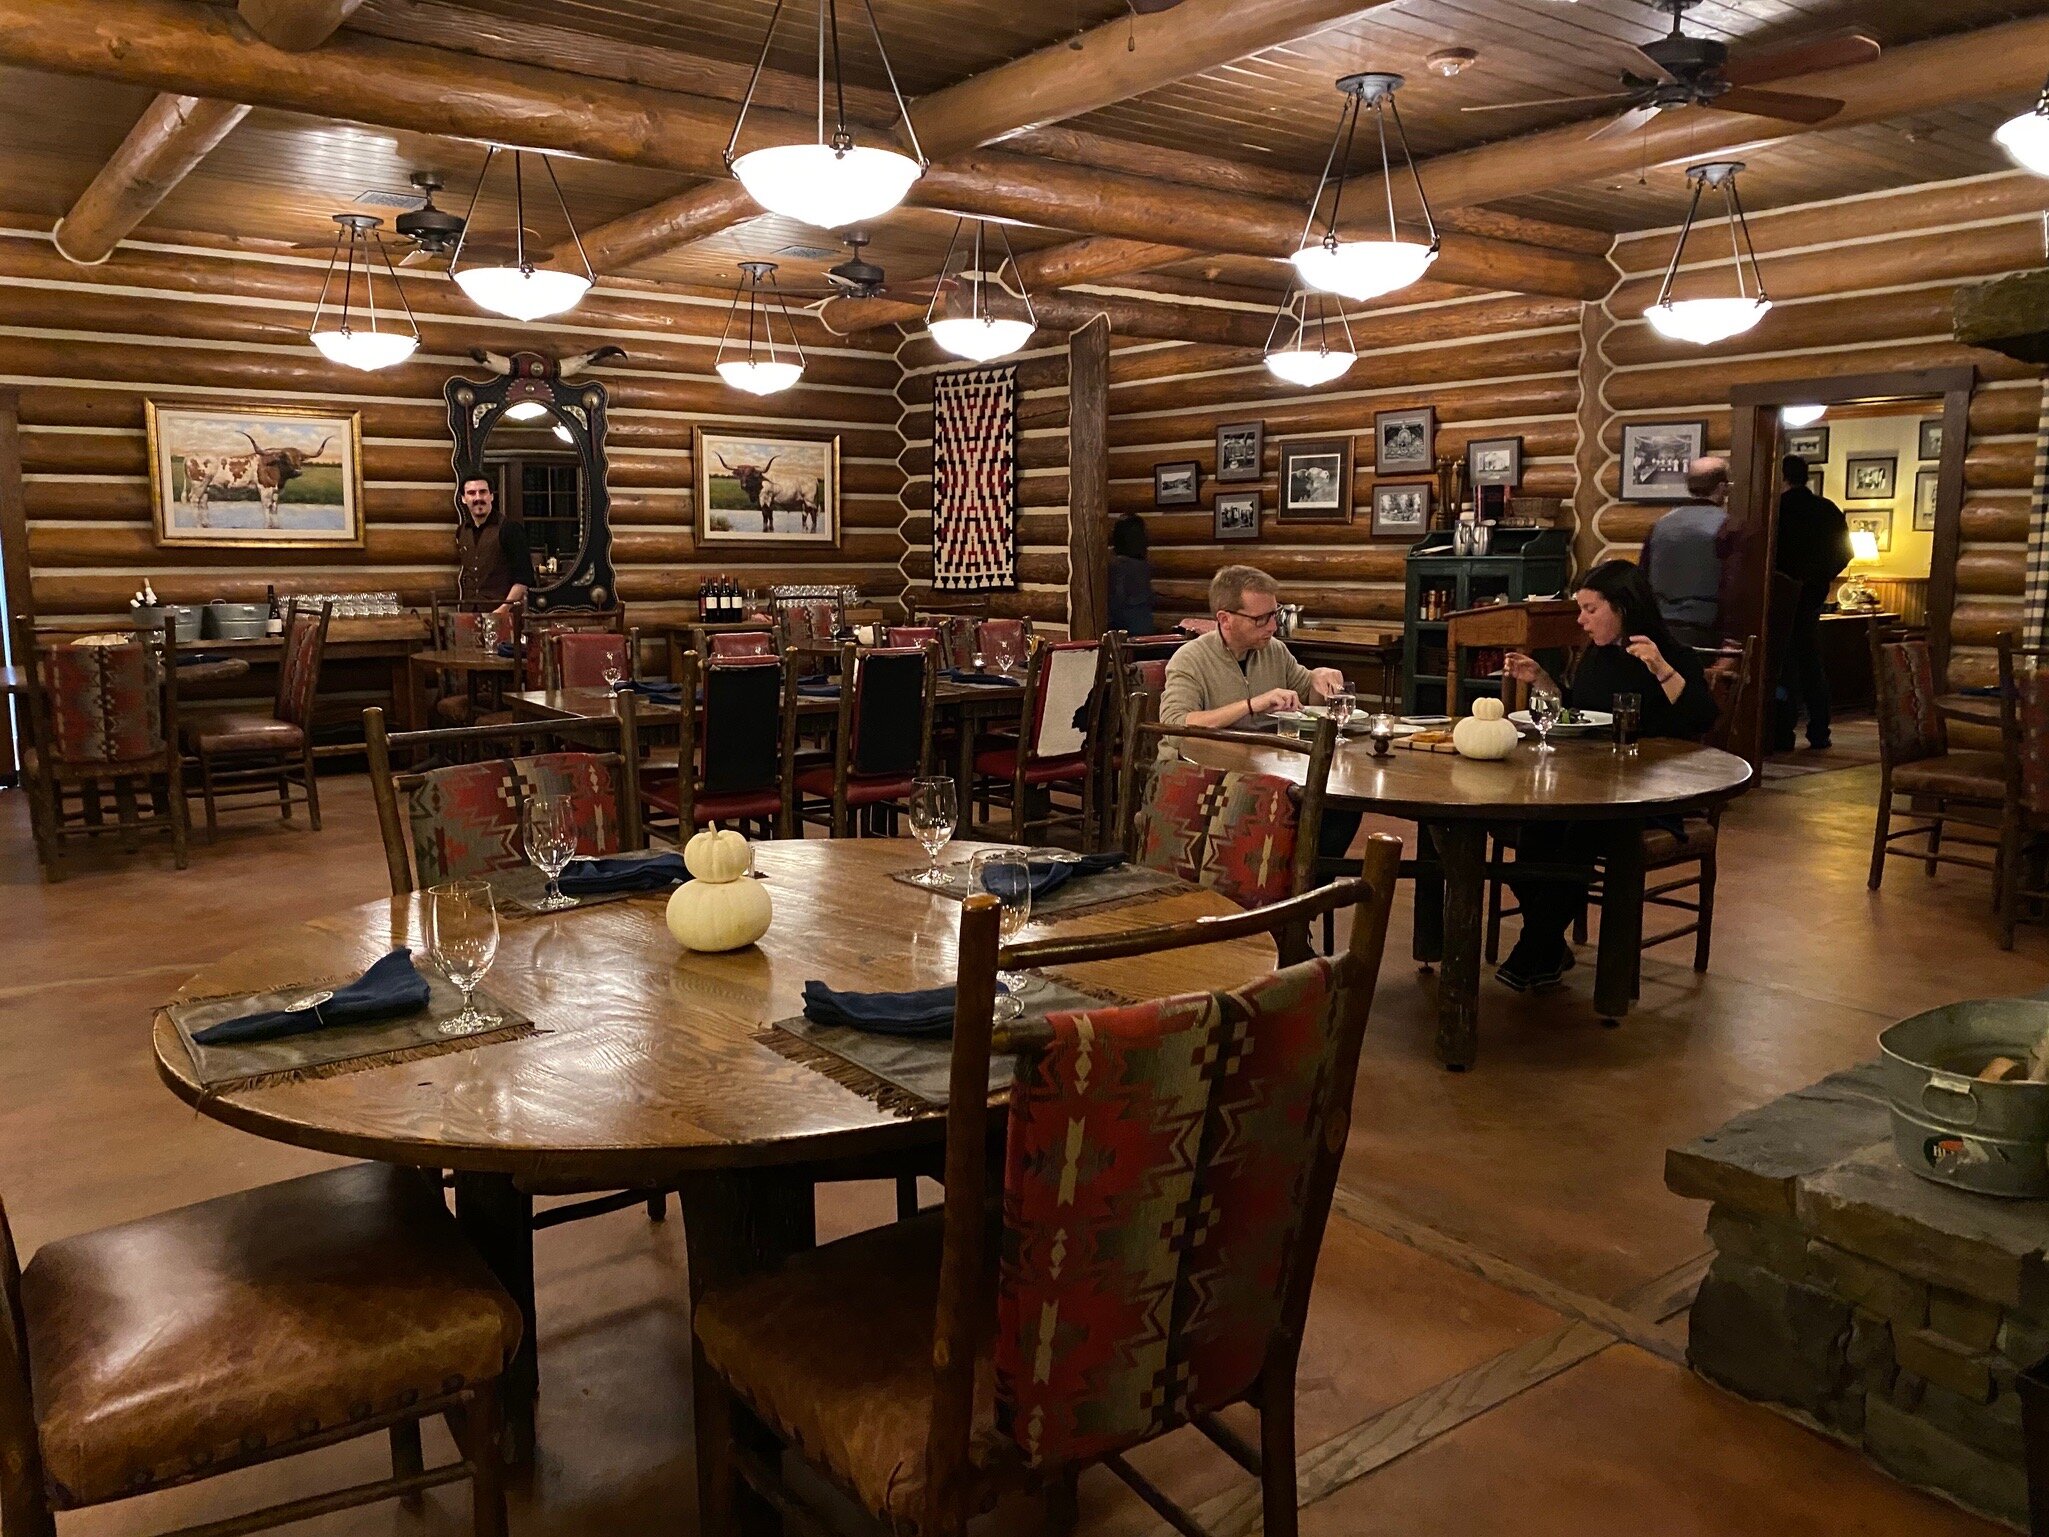 The dining room inside the Granite Lodge serves breakfast, lunch and dinner and will also pack picnic lunches for your Montana excursions.